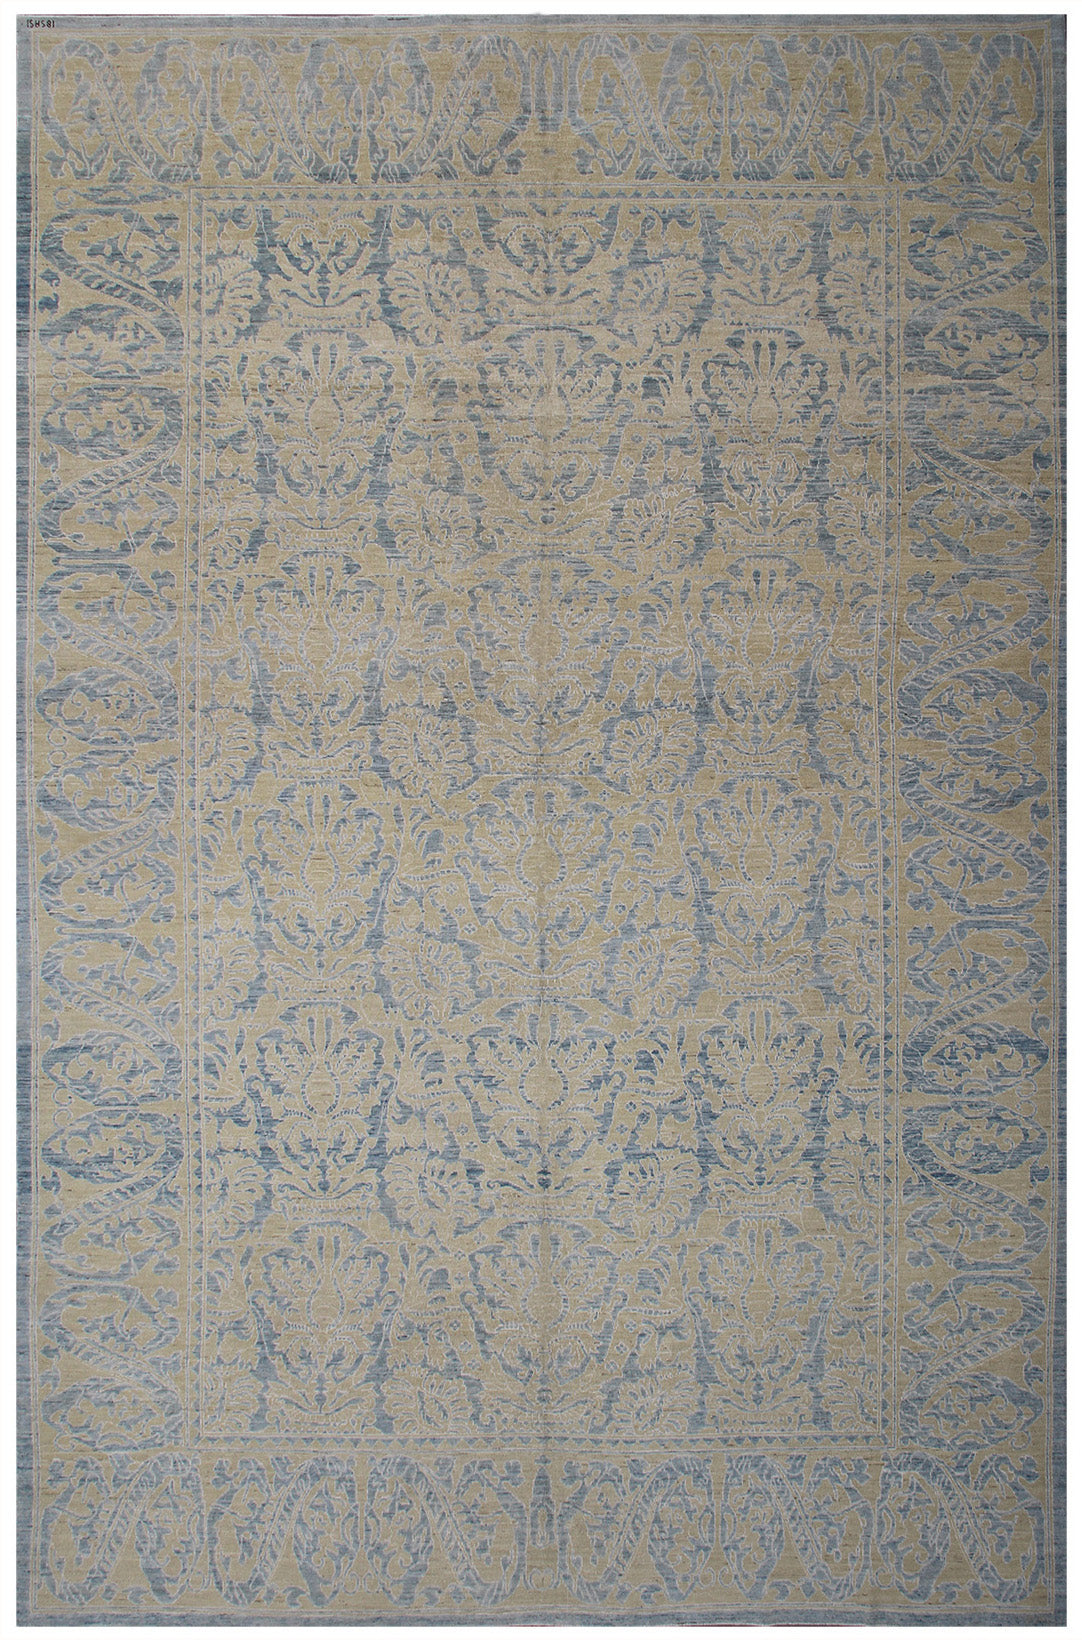 13'x9' Ariana Transitional Blue Gold Floral Design Rug